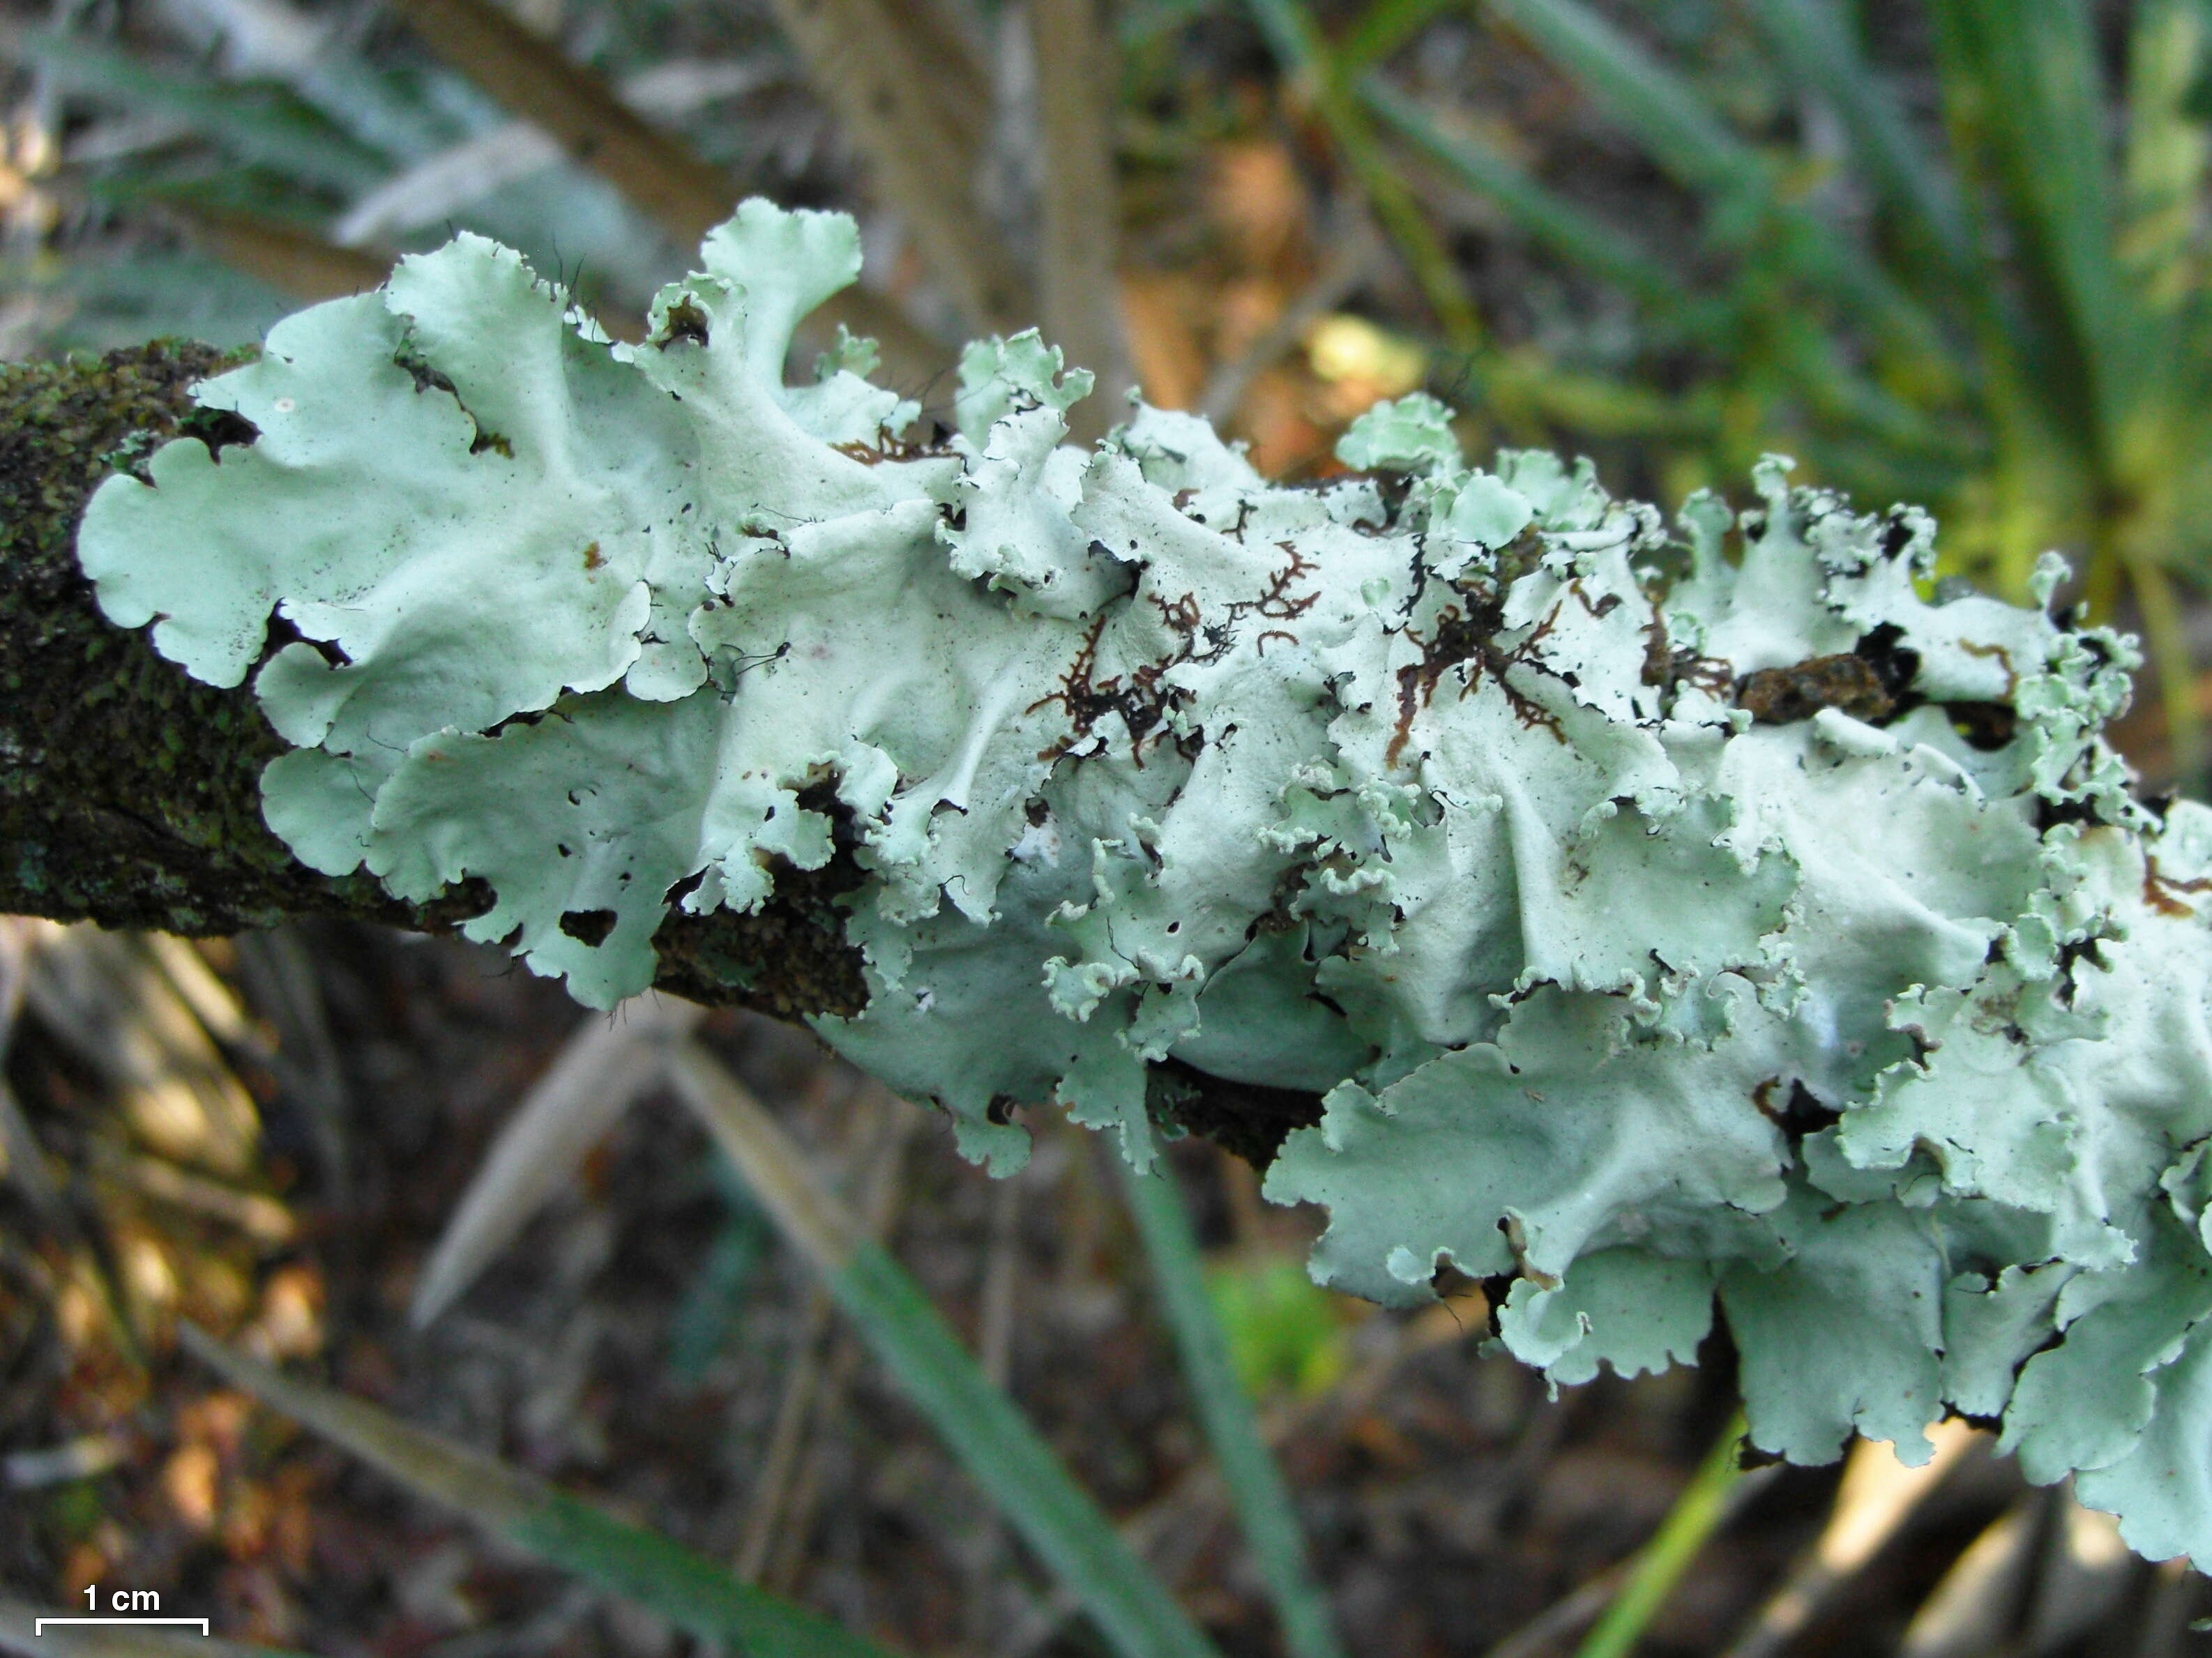 Image of Long-whiskered ruffle lichen